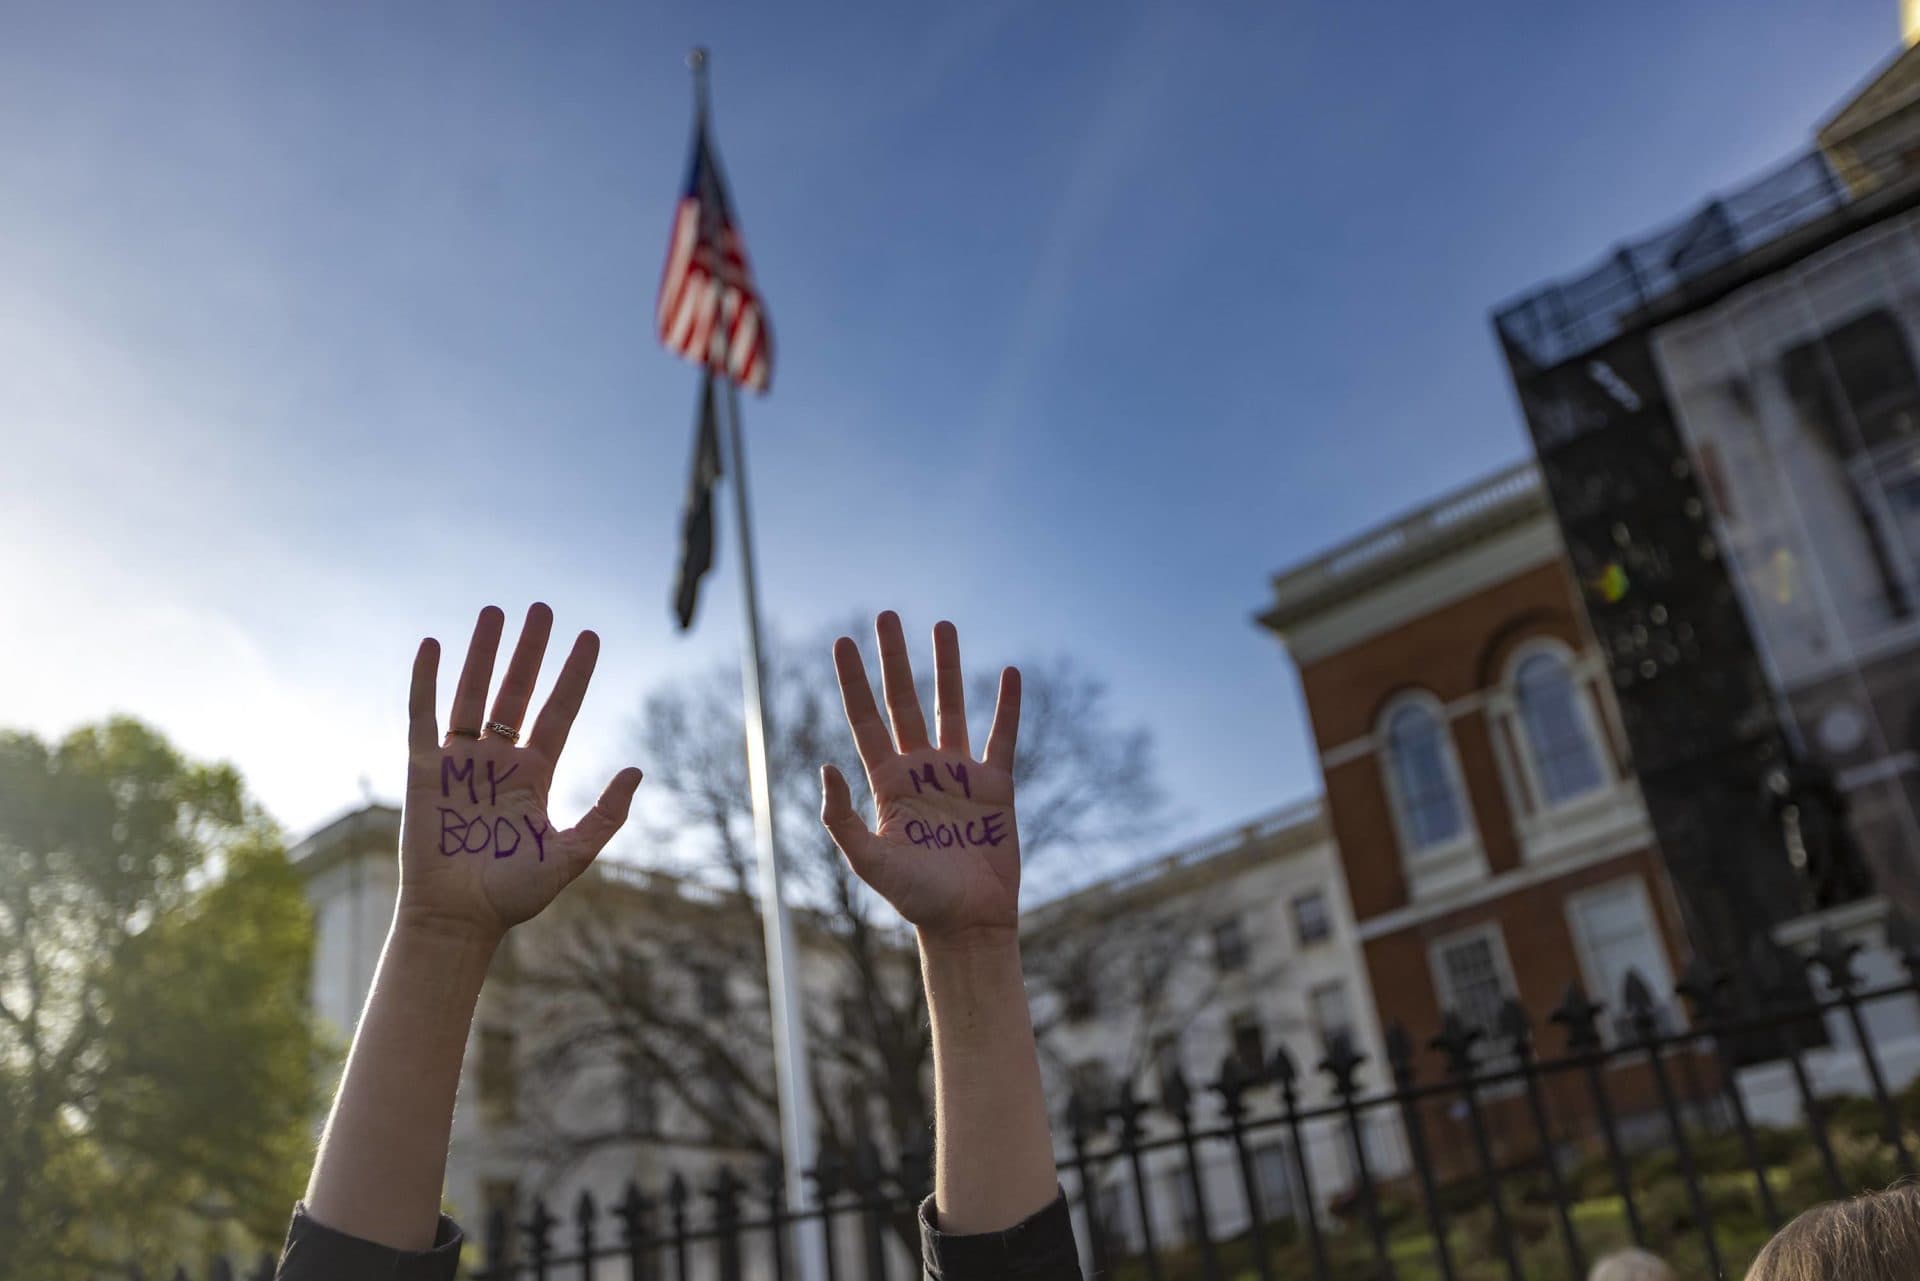 Alexa Steele wrote the words &quot;my body my choice&quot; on the palms of her hands as she joined thousands of others at the Defend Abortion Rights rally at the Massachusetts State House. (Jesse Costa/WBUR)